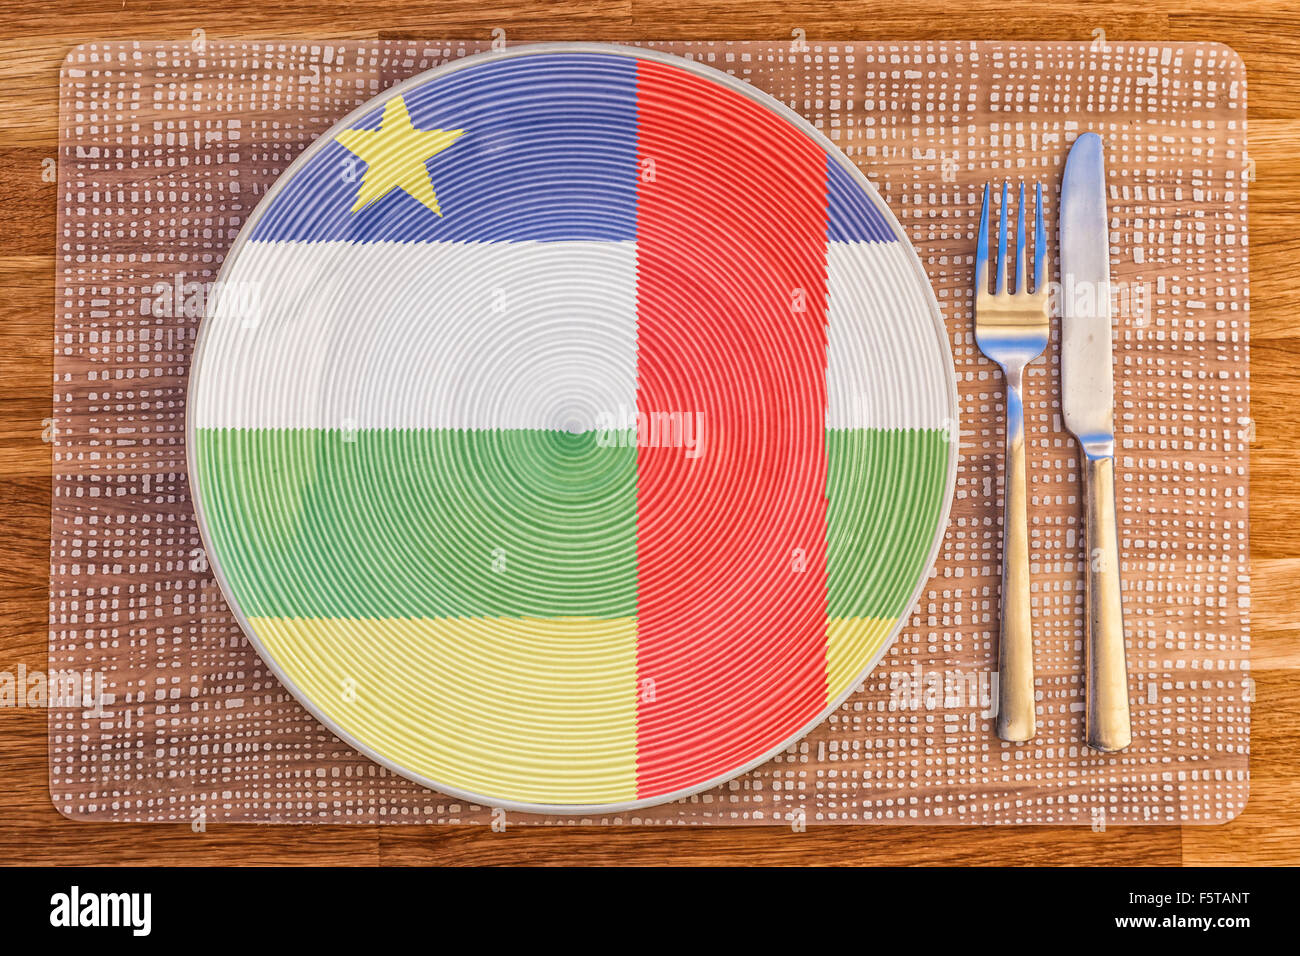 Dinner plate with the flag of the Central African Republic on it for your international food and drink concepts. Stock Photo